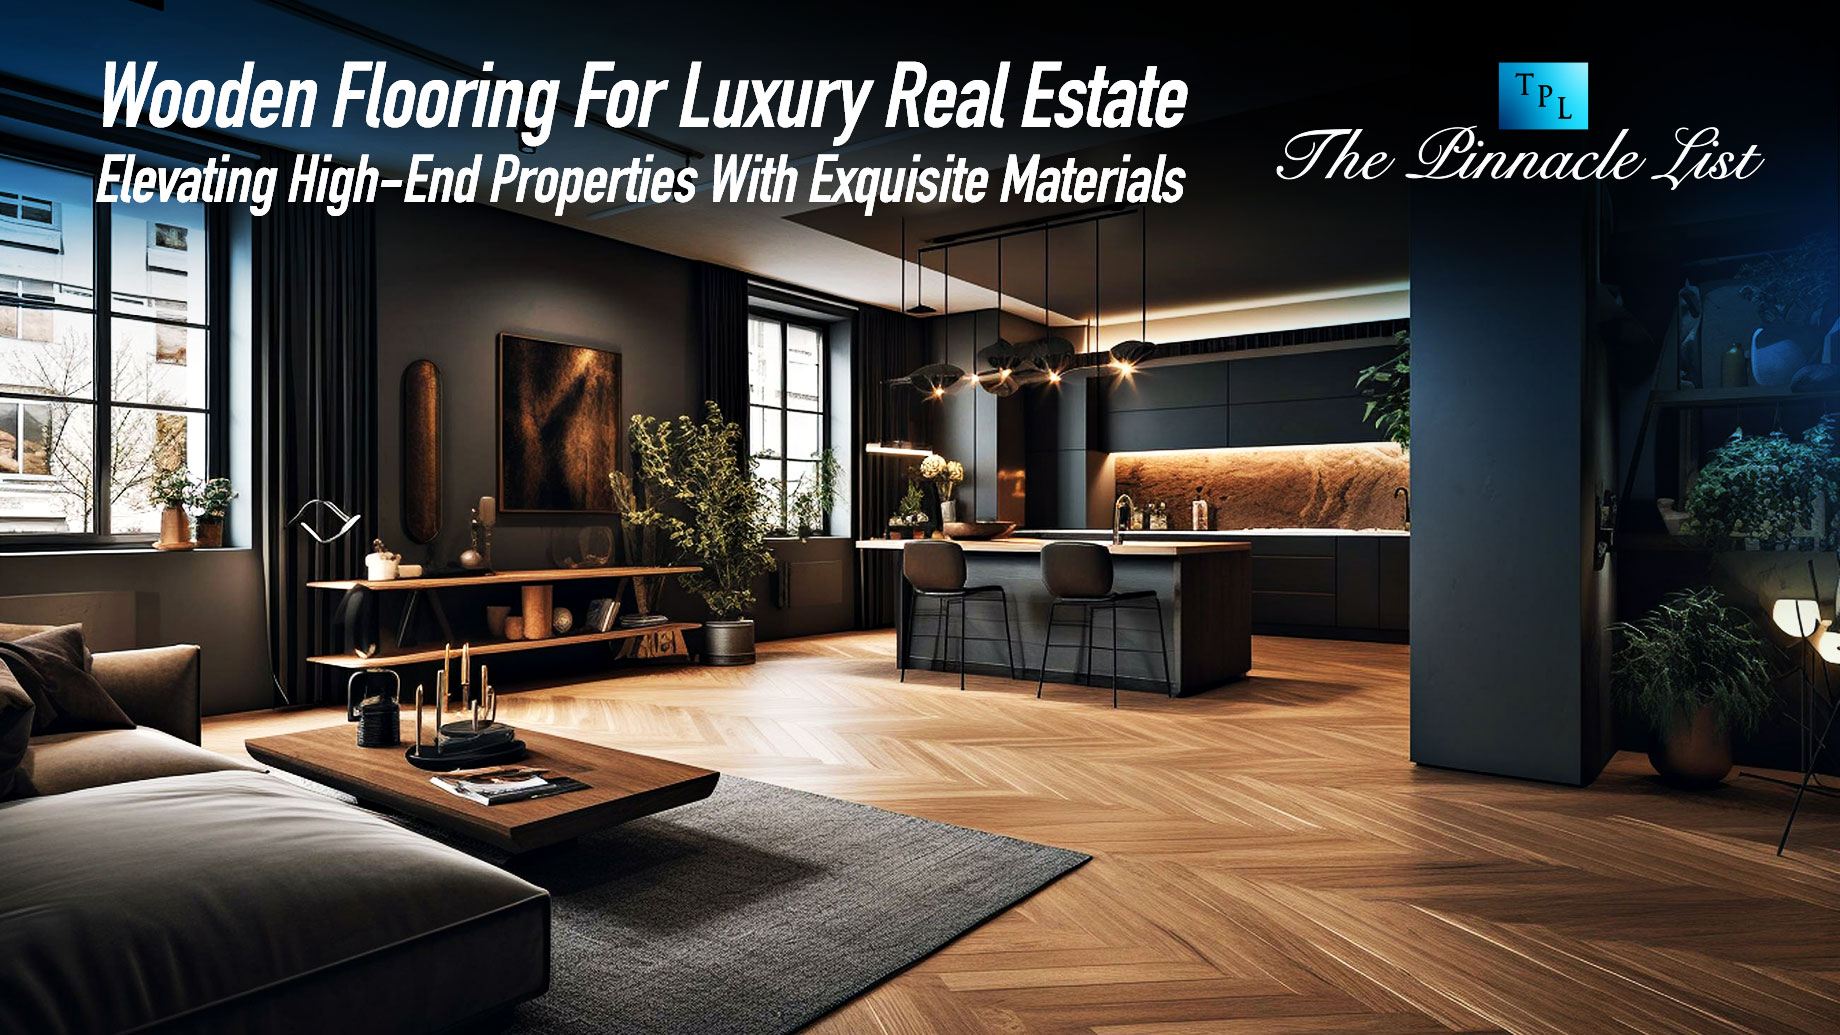 Wooden Flooring For Luxury Real Estate: Elevating High-End Properties With Exquisite Materials